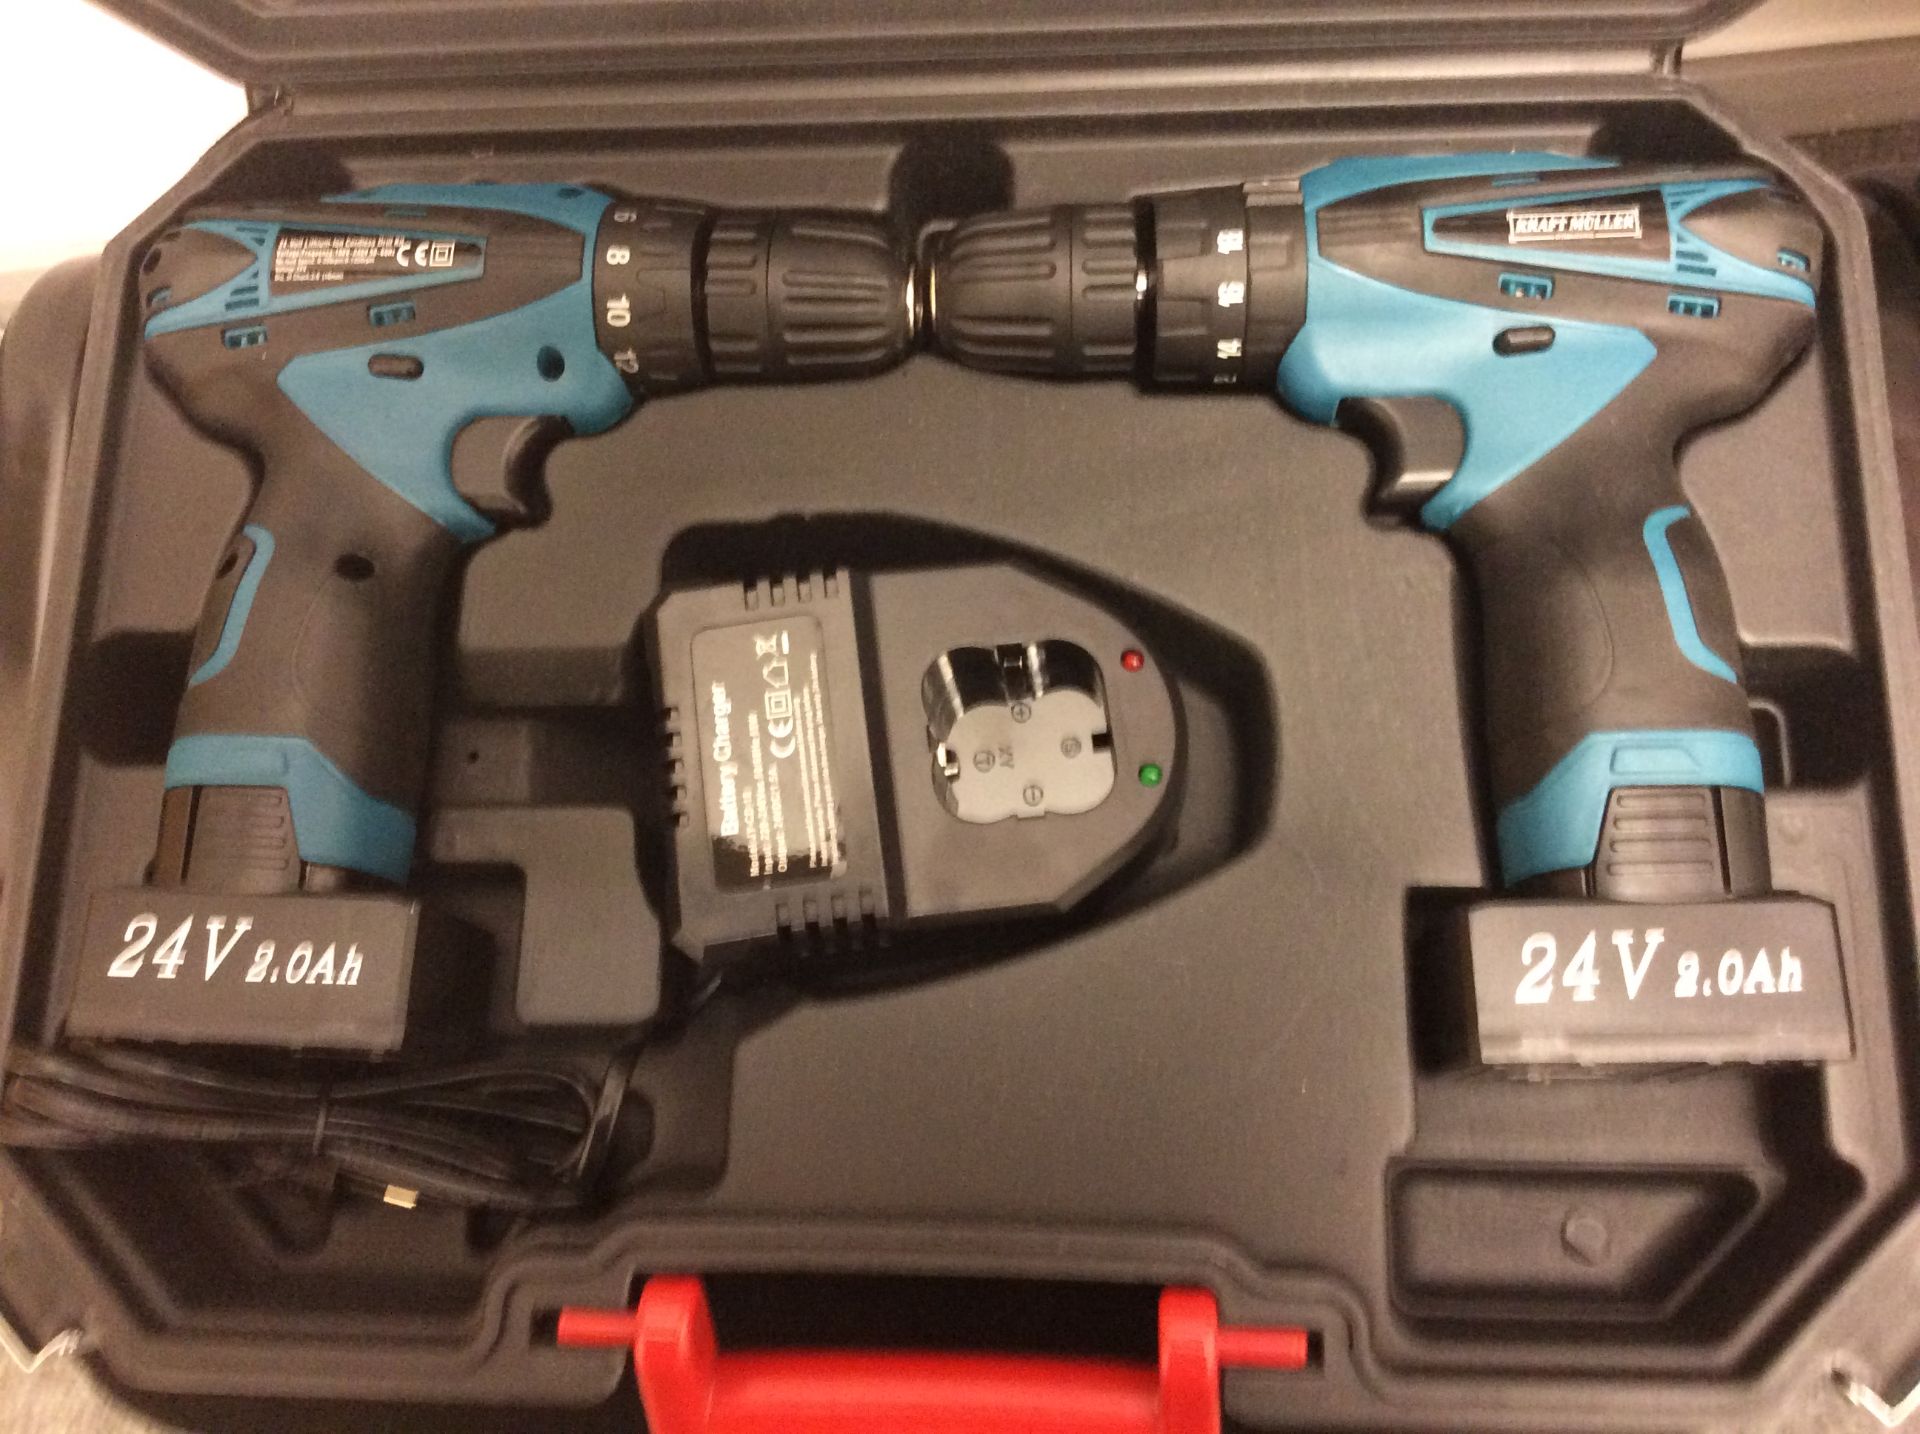 V Brand New 24 volt Twin Drill Set Lithium Ion Cordless In Carry Case With Keyless Chuck - Impact - Image 2 of 3